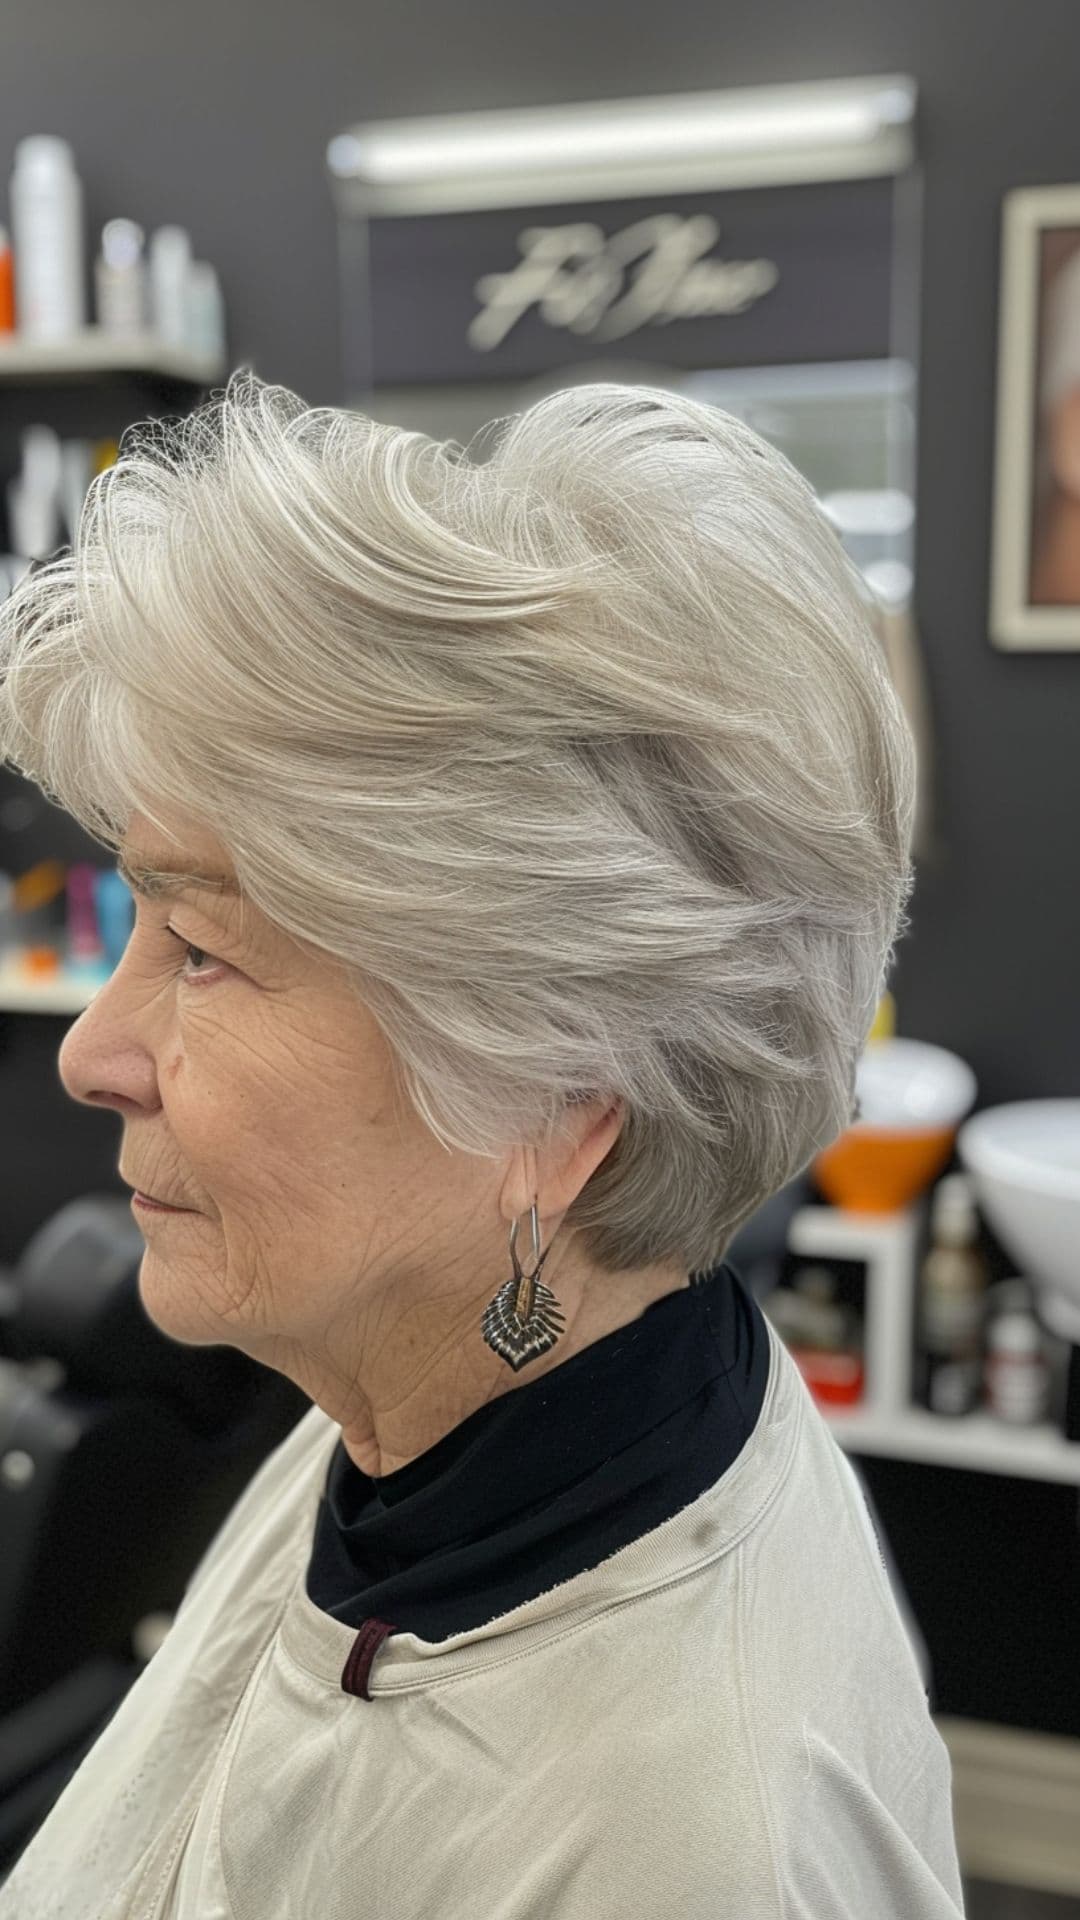 An old woman modelling a feathered haircut.